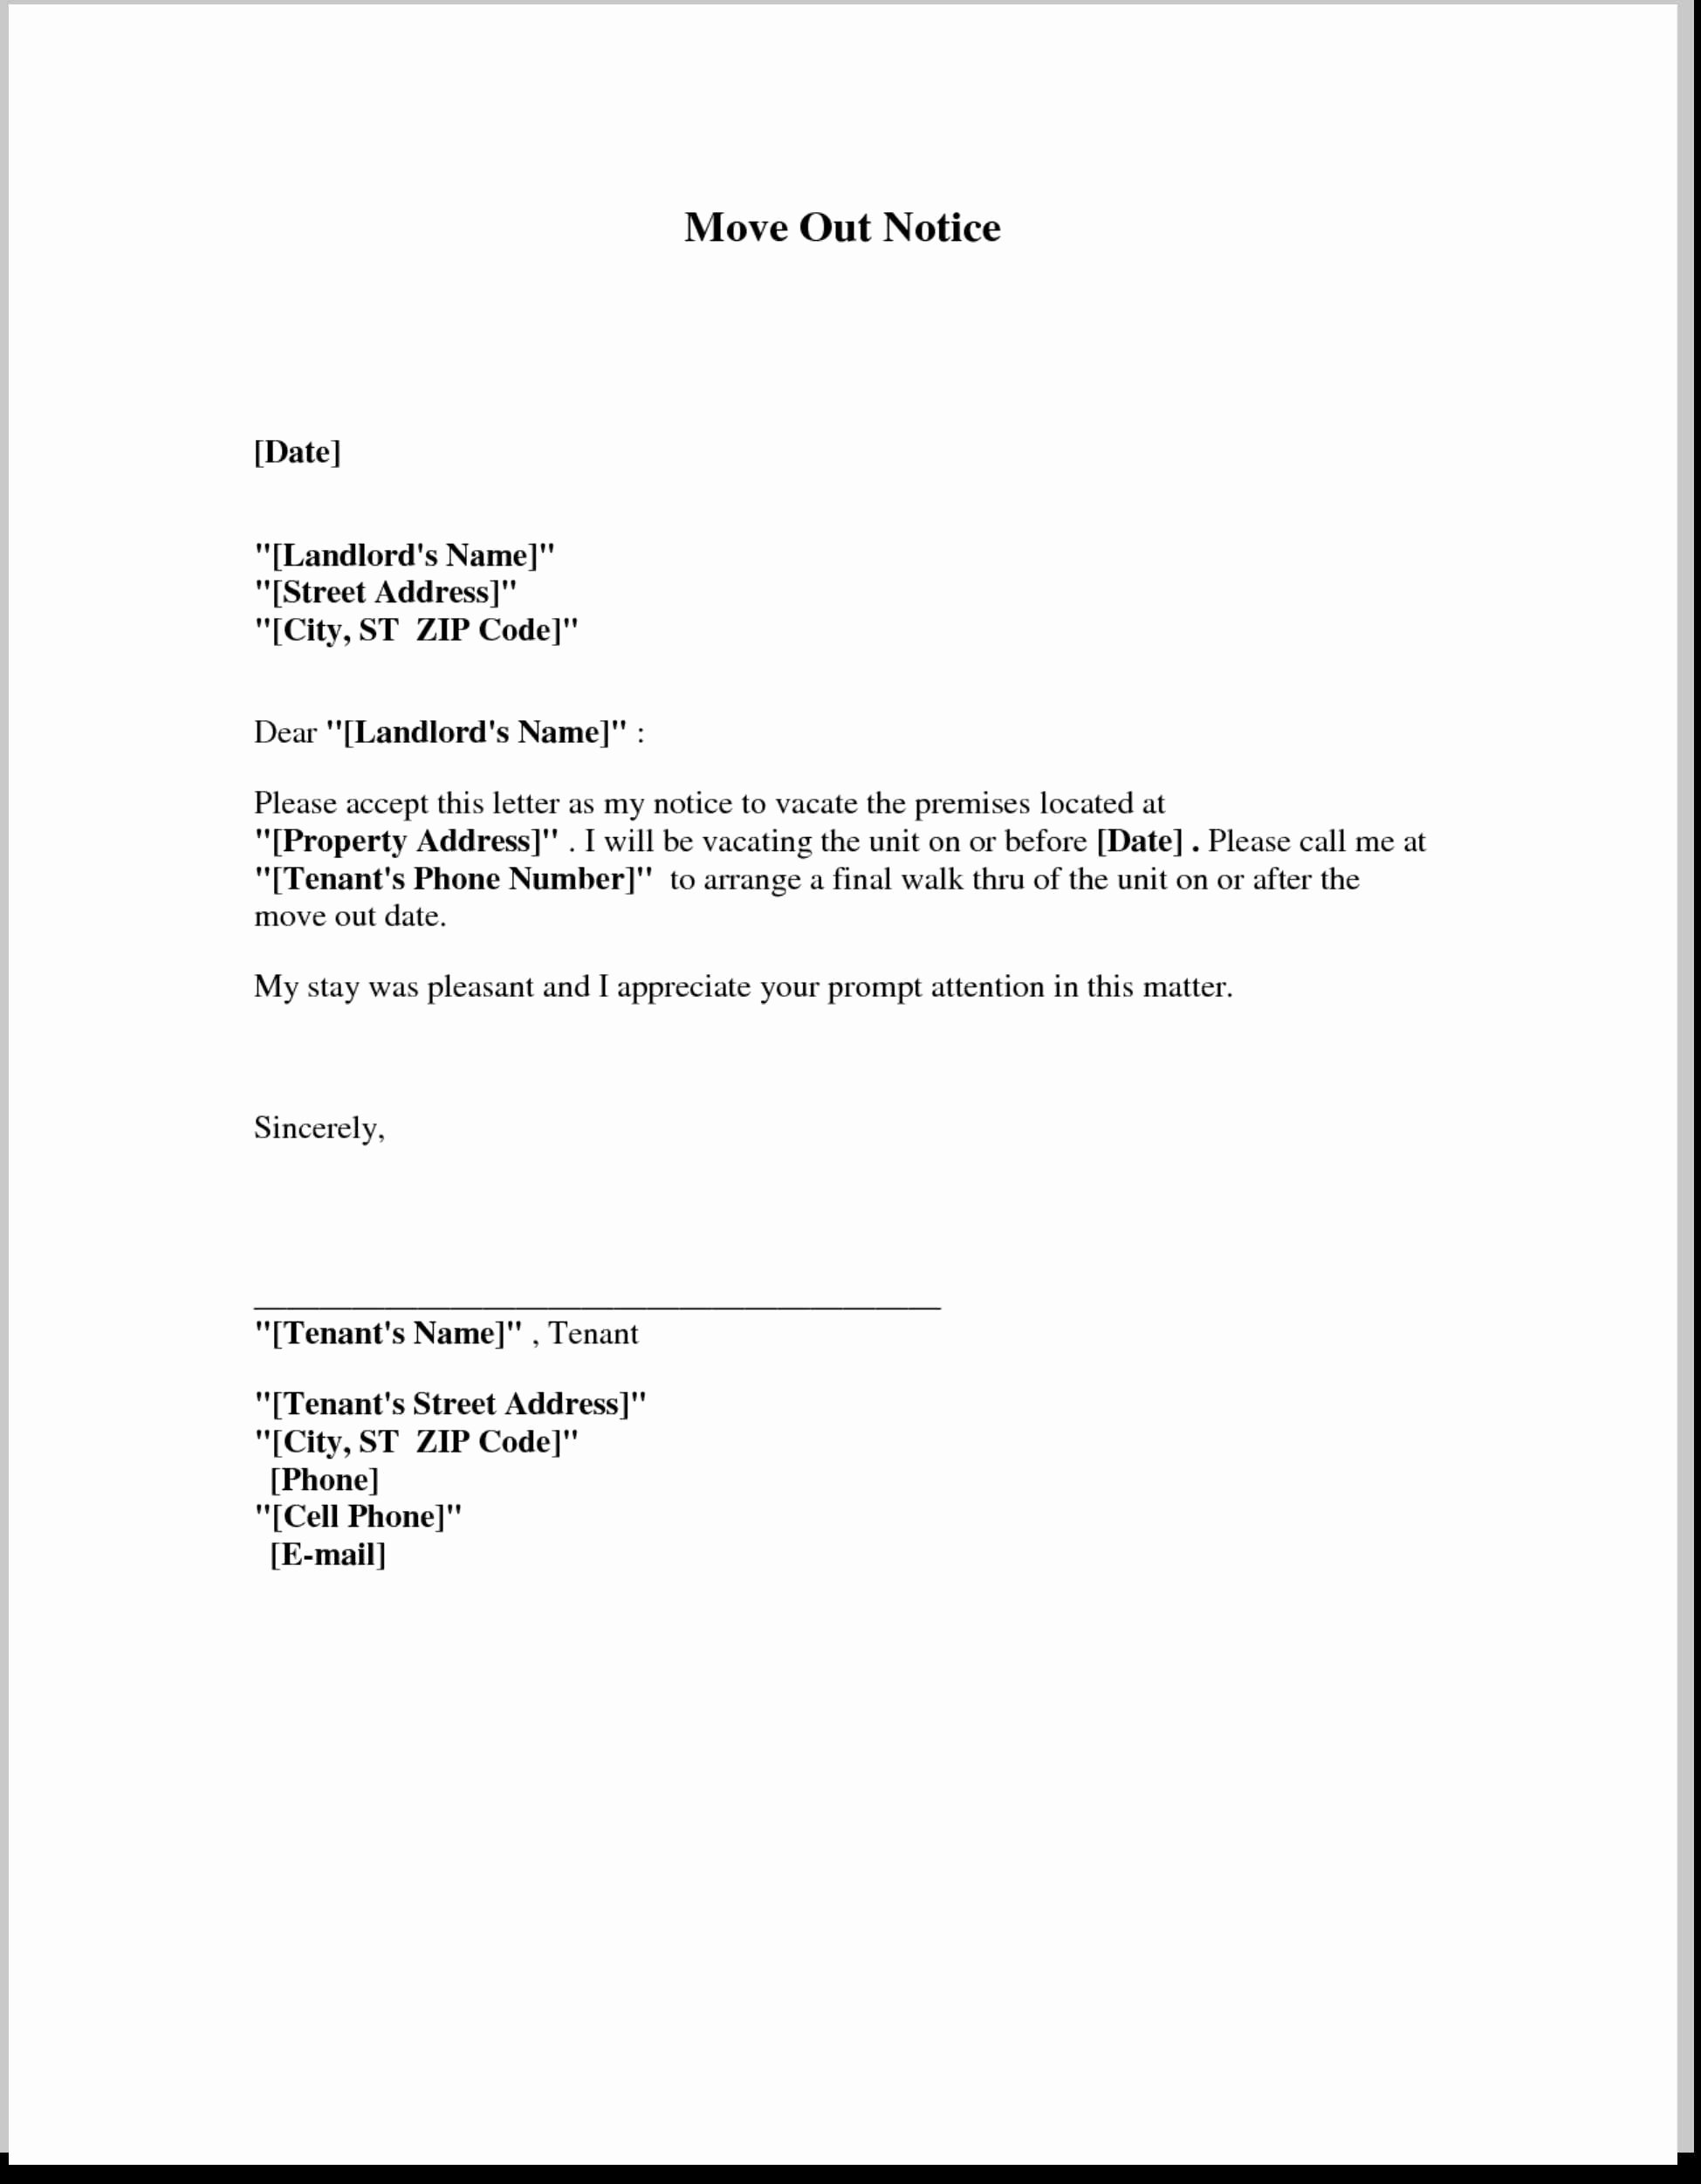 Move Out Letter Template Luxury Moving Out Letter to Landlord